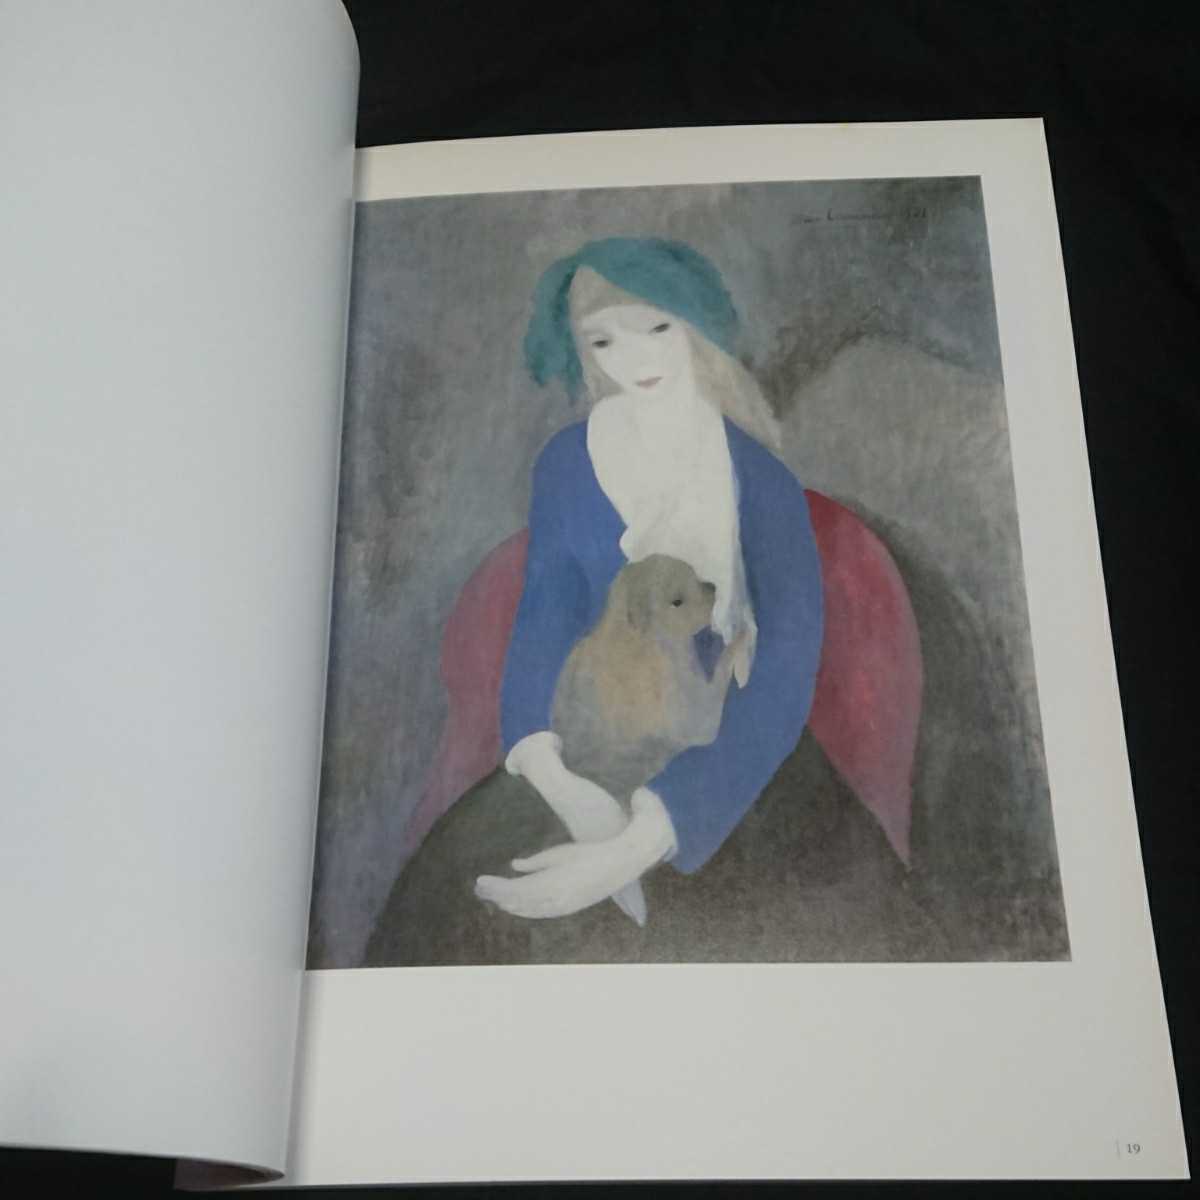  book of paintings in print llustrated book *20 century France picture exhibition 1996 year /. Takumi /ruo-vu llama nk Picasso rolan sun yuto Lilo car girl ki sling /.. height virtue /sskw1